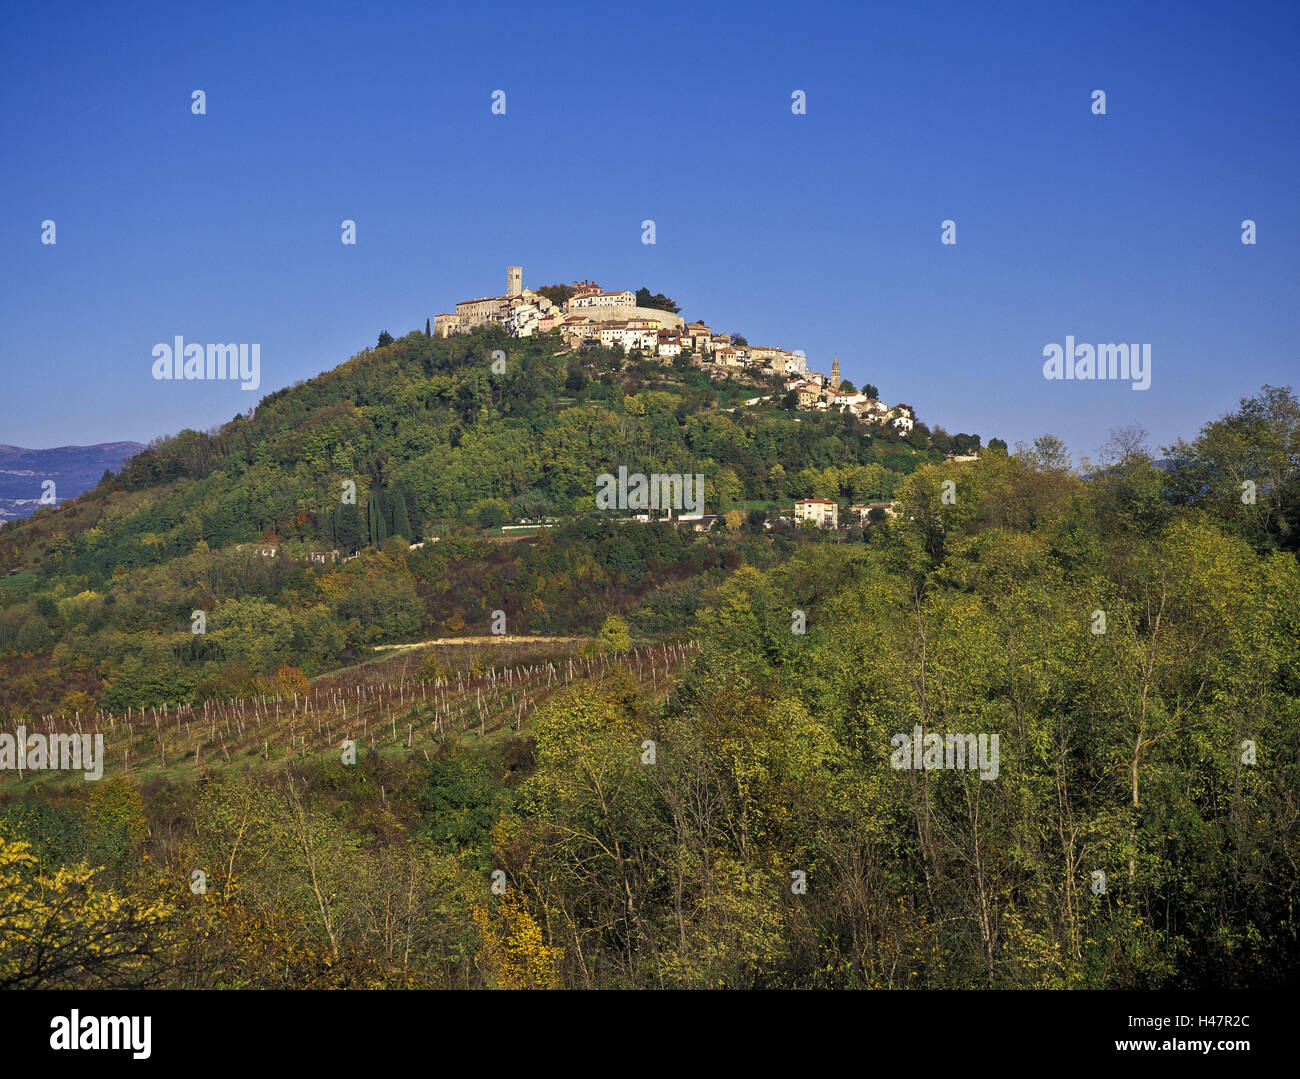 Croatia, Istria, Mirna Valley, Motovun, Cityscape, Woods, Forest, Adria, Old Town, Balkan, mountains, trees, mountain landscapes, geography, season, autumn, hill village, season, sky, blue, landscape, blue, foliage discoloration, foliage, Mountain, summer, afternoon, city, trees, season, destination, attraction, sunshine, tourism, sky, vacation, vineyard, weather, Mediterranean, cloudless, Stock Photo